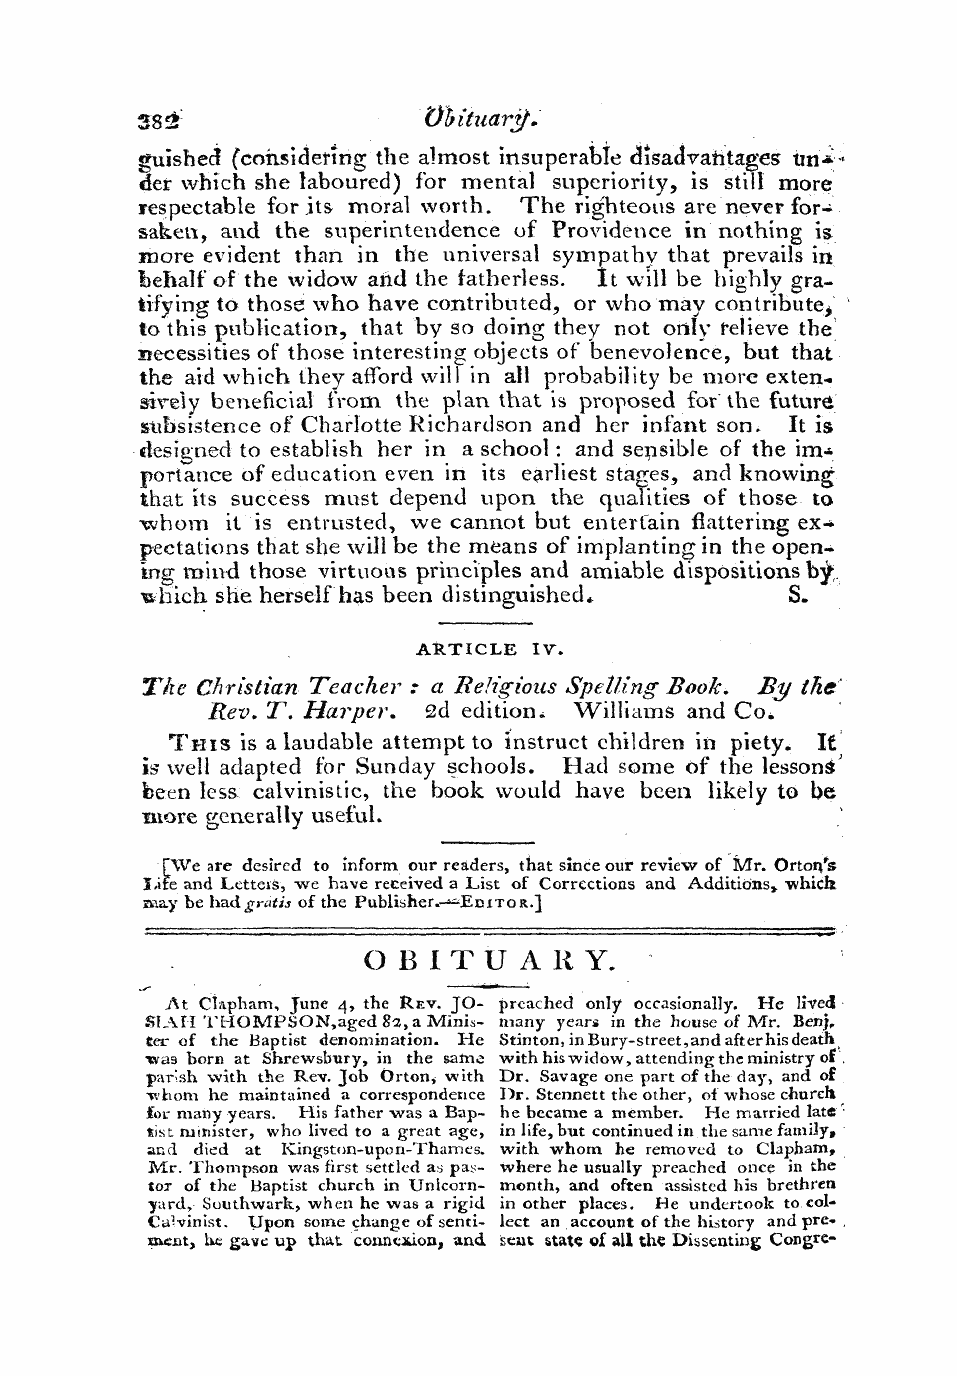 Monthly Repository (1806-1838) and Unitarian Chronicle (1832-1833): F Y, 1st edition: 46